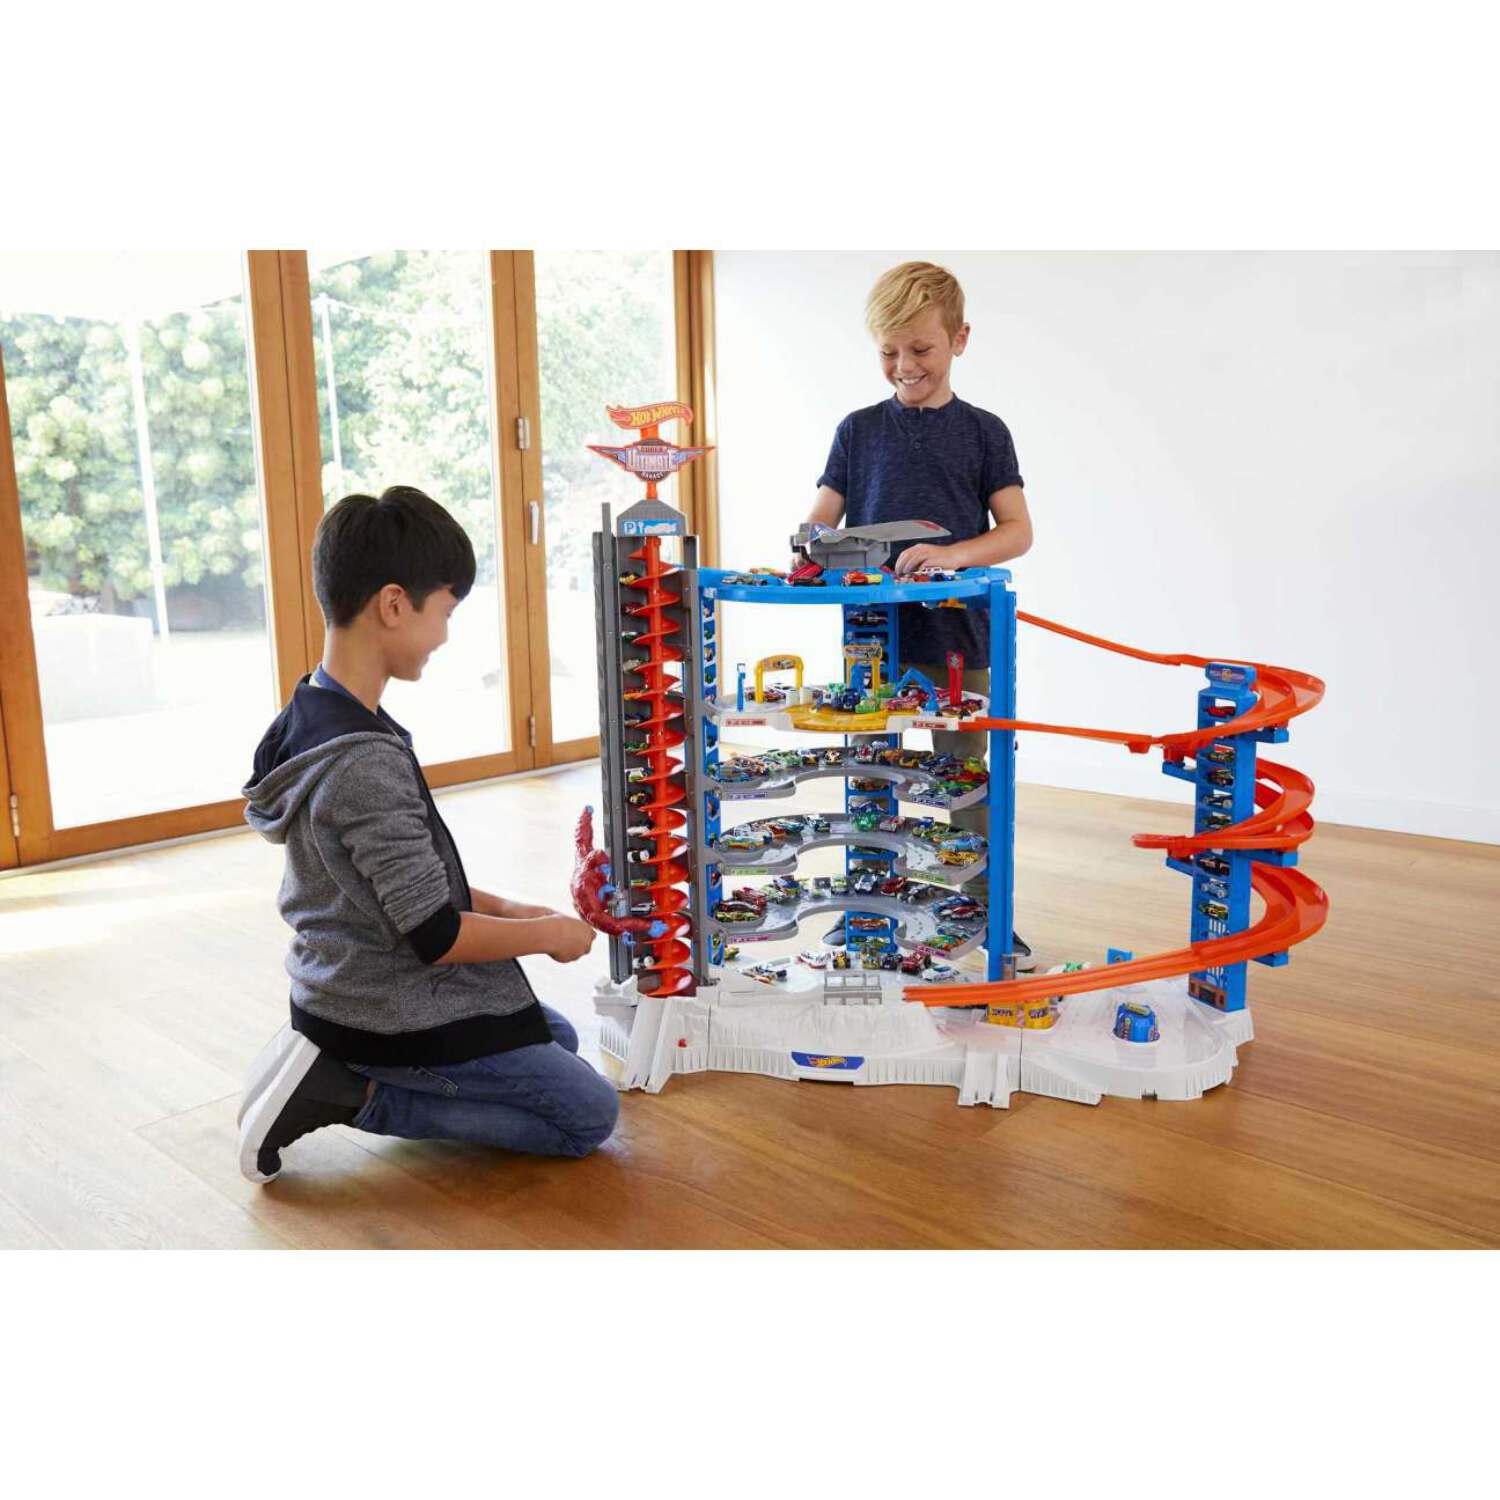 Hot Wheels Track Set with 4 1:64 Scale Toy Cars, Super Ultimate Garage, Over 3-Feet Tall - image 4 of 8